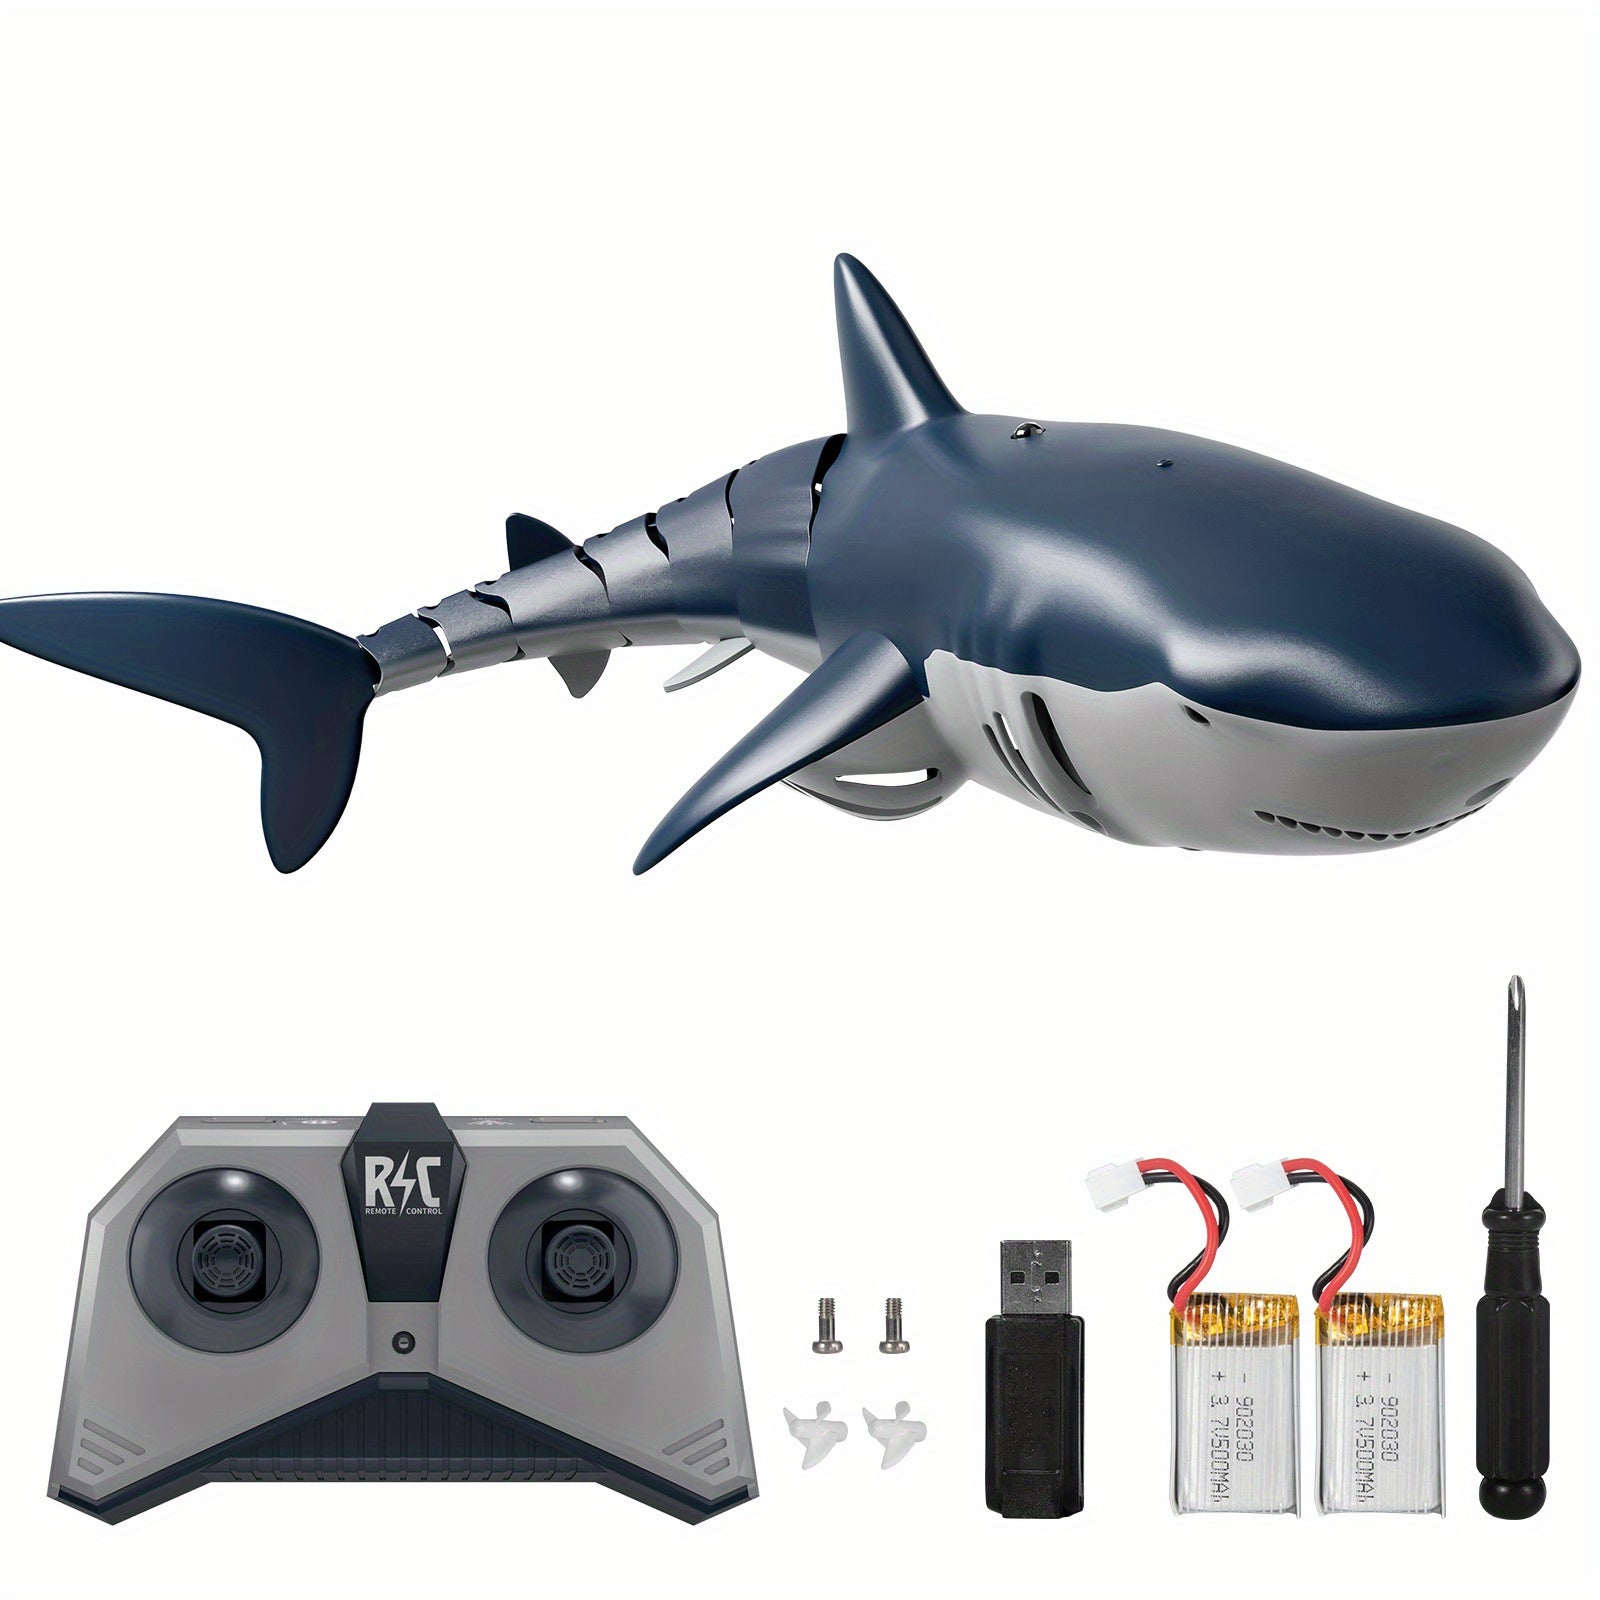 TEMI Remote Control Shark 1:18 High Simulation Scale Fish With Light & Spray Water For Lake Bathroom Pool Toys For Kids Boys Halloween Christmas Birthday Gift RC Boat - Cykapu